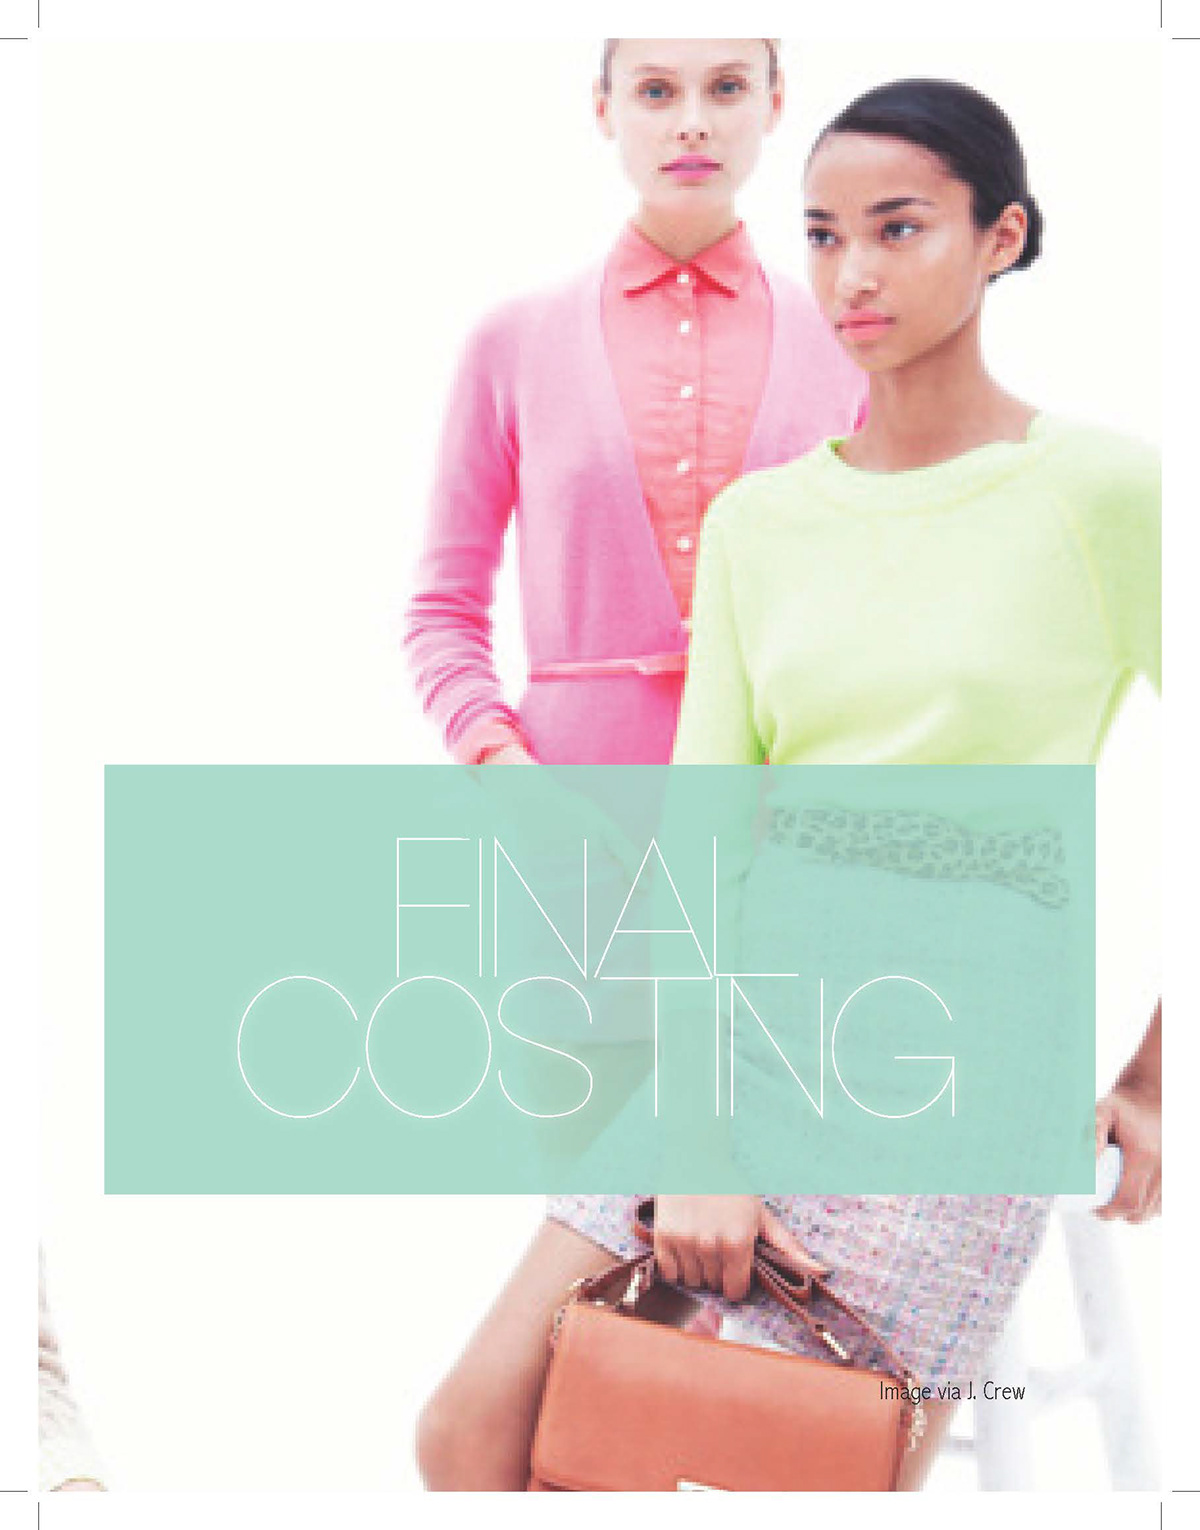 Global Sourcing Sourcing Strategy Fashion merchandising product development